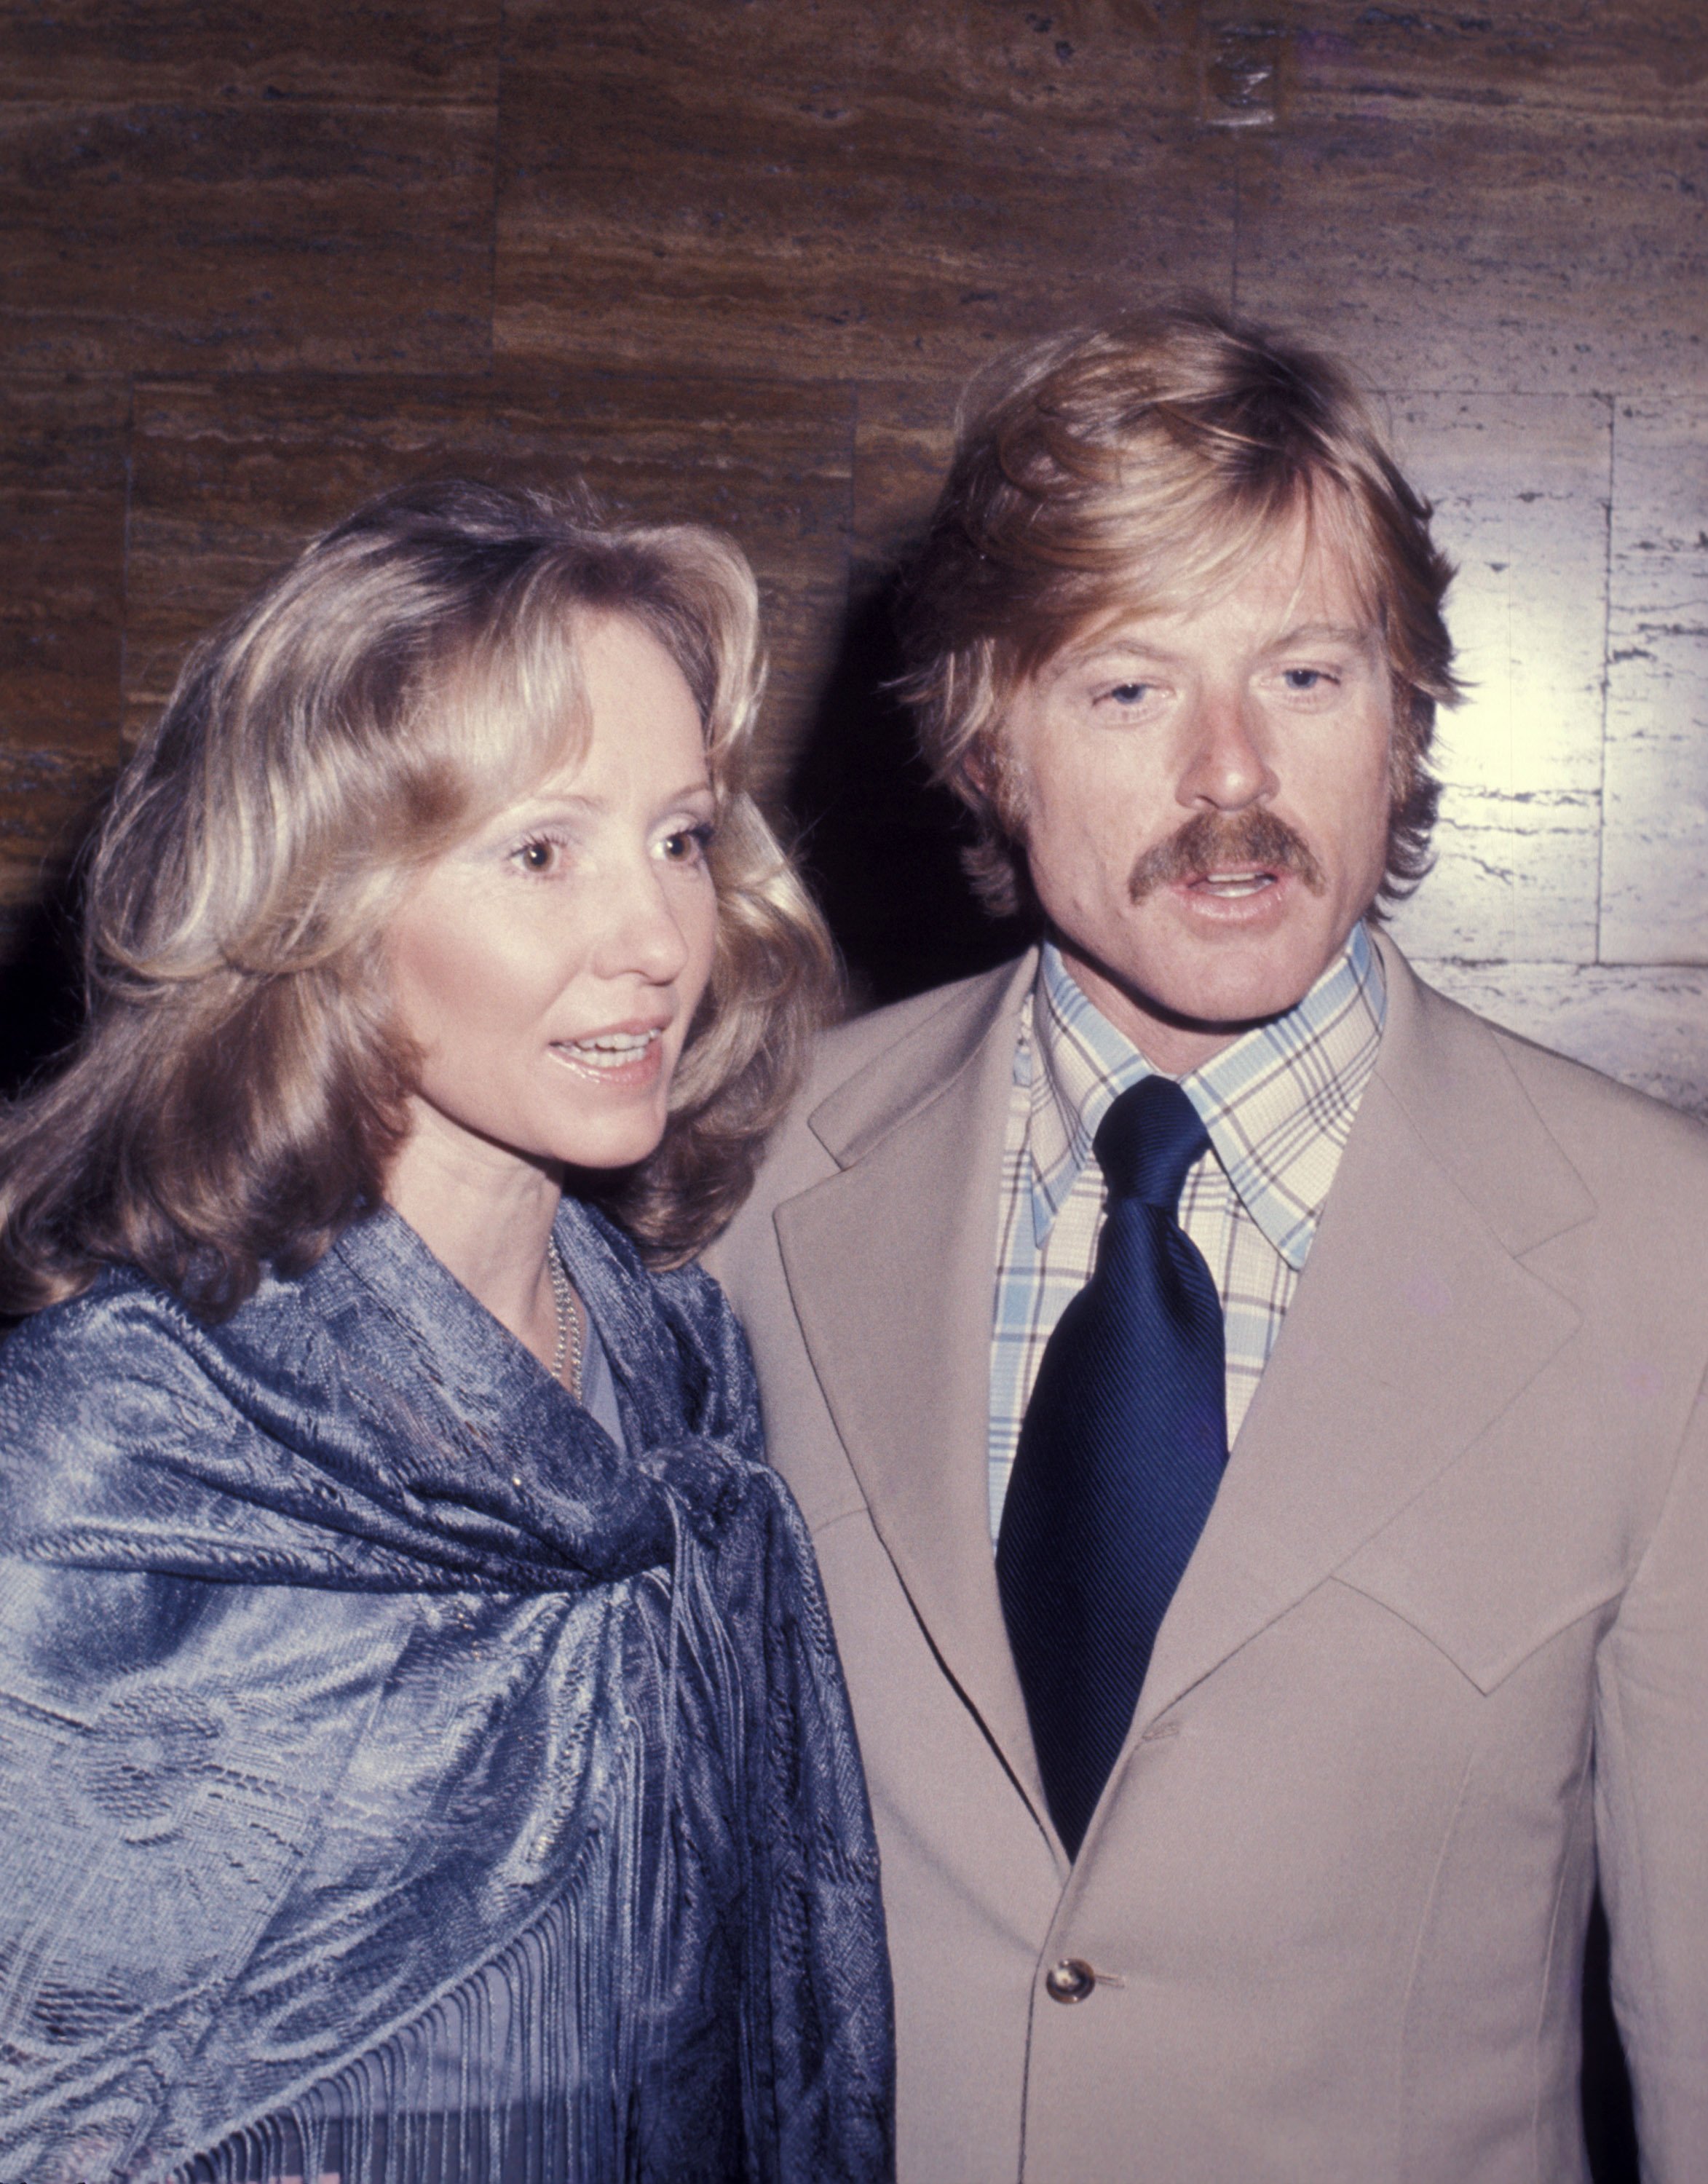 Lola Redford and Robert Redford at the premiere of "All the President's Men" in New York on April 5, 1976 | Source: Getty Images